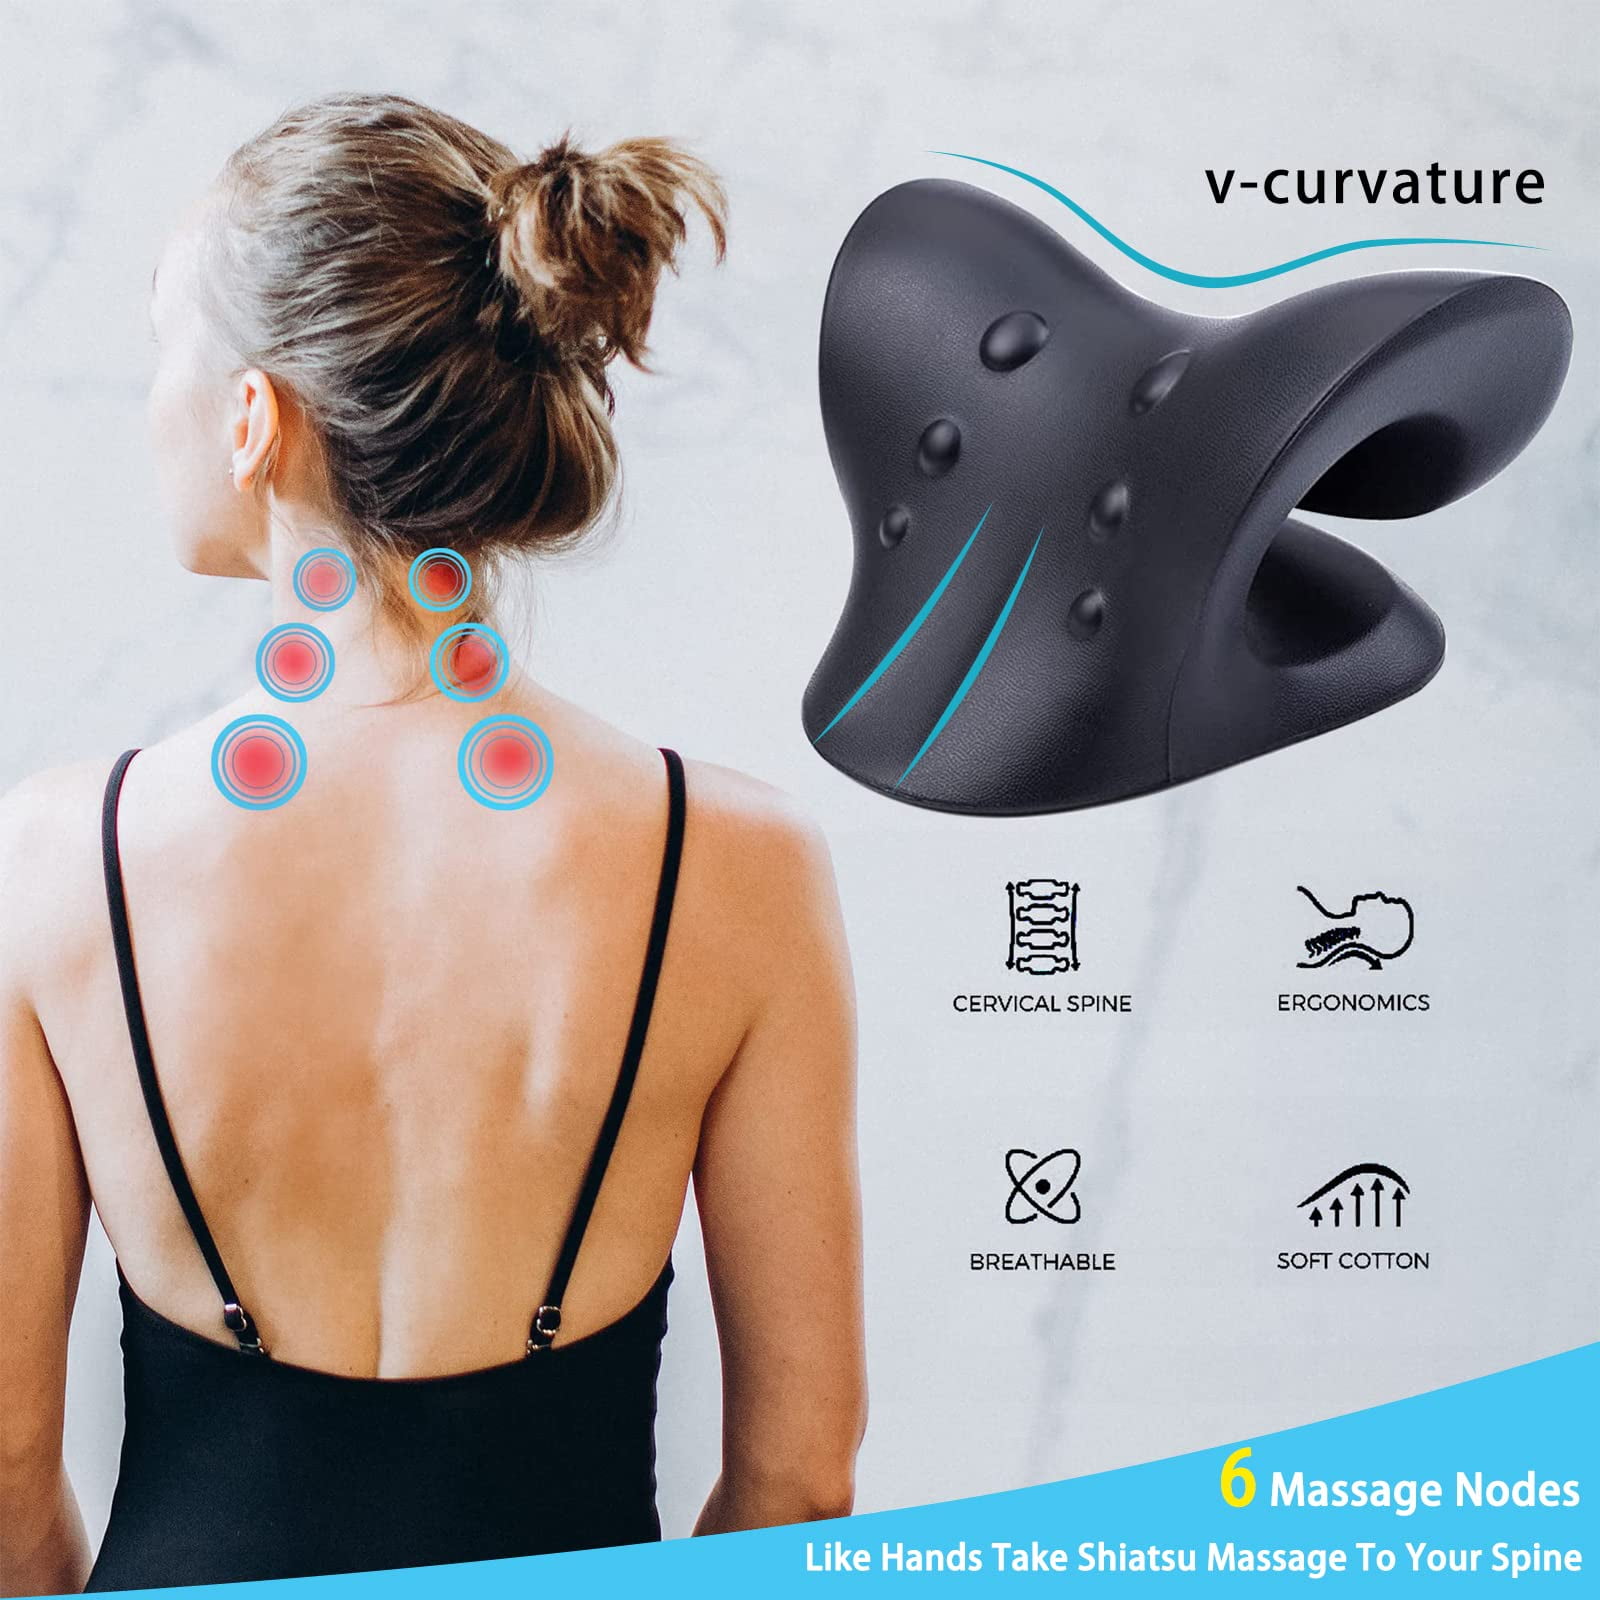 Real Relax® Neck Traction Device Massage Neck Pillows with Heat Therapy and  Electrotherapy for Neck Pain Cervical Care